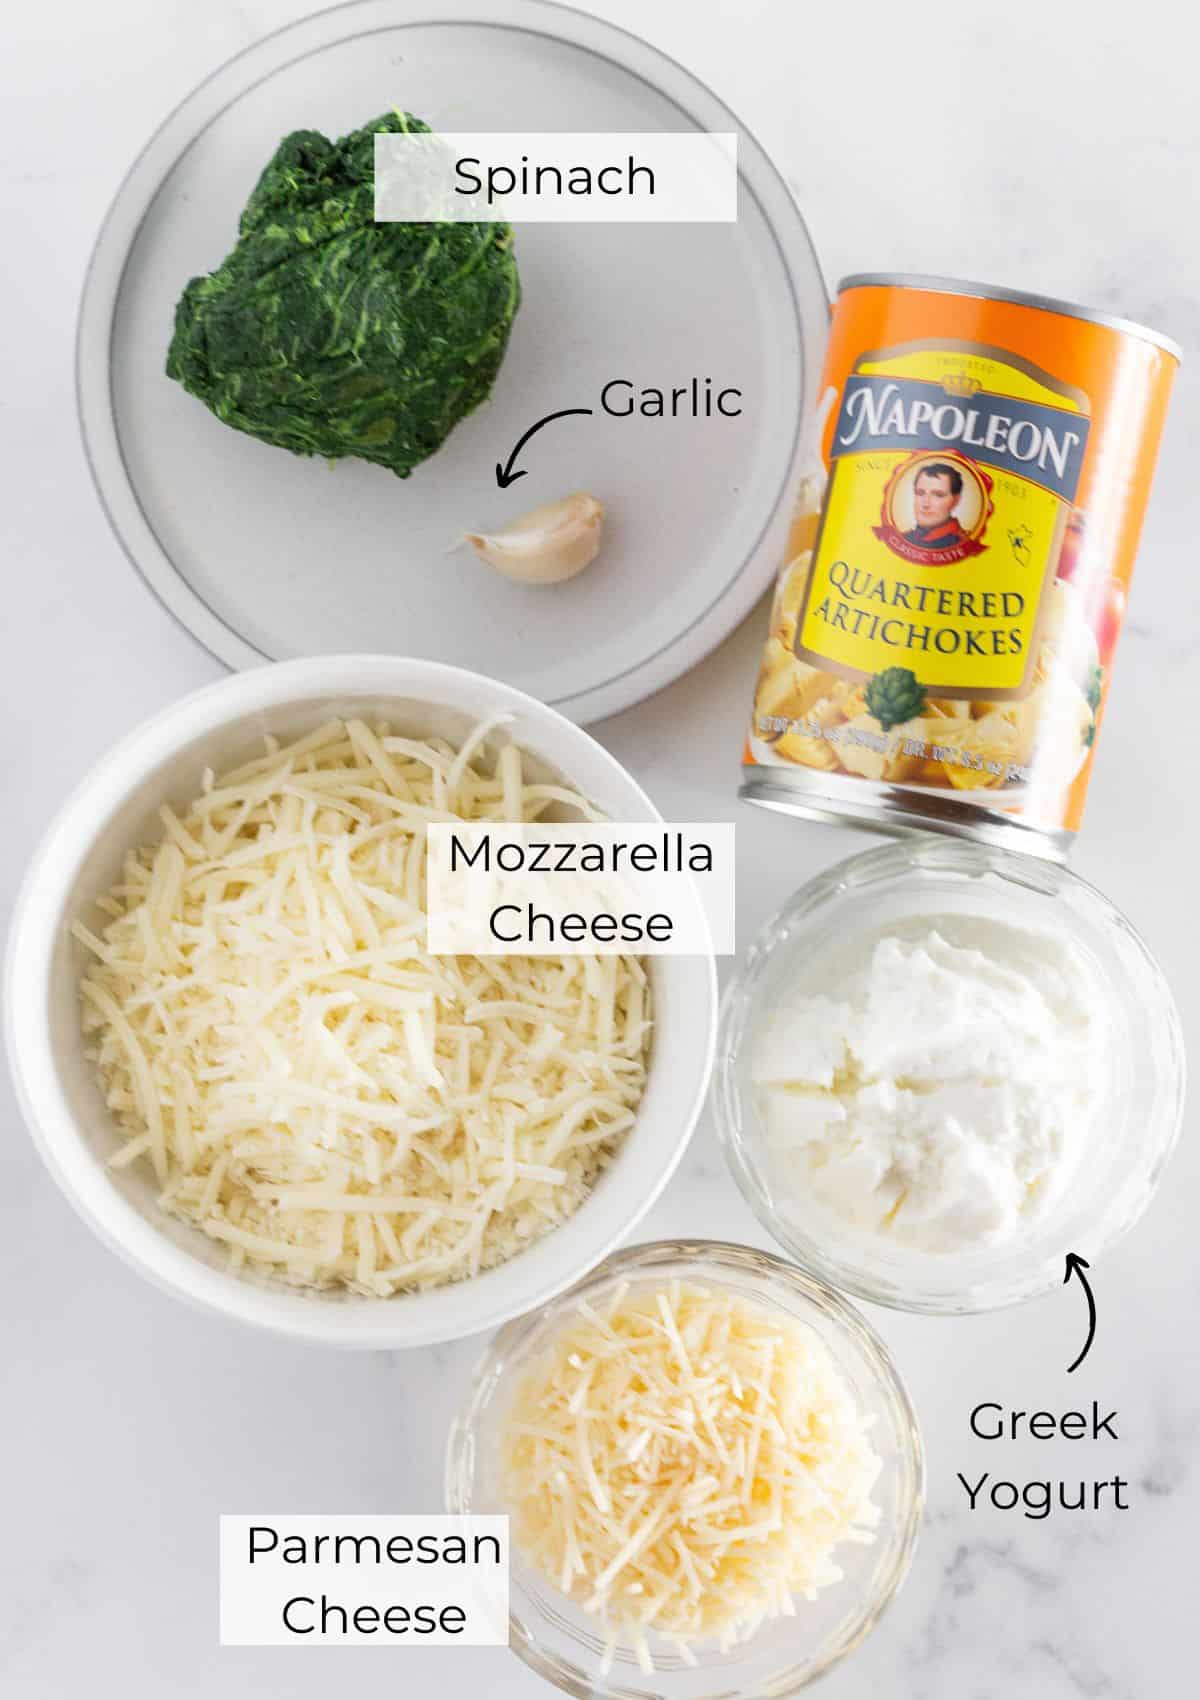 Ingredients needed to make Spinach and Artichoke dip.